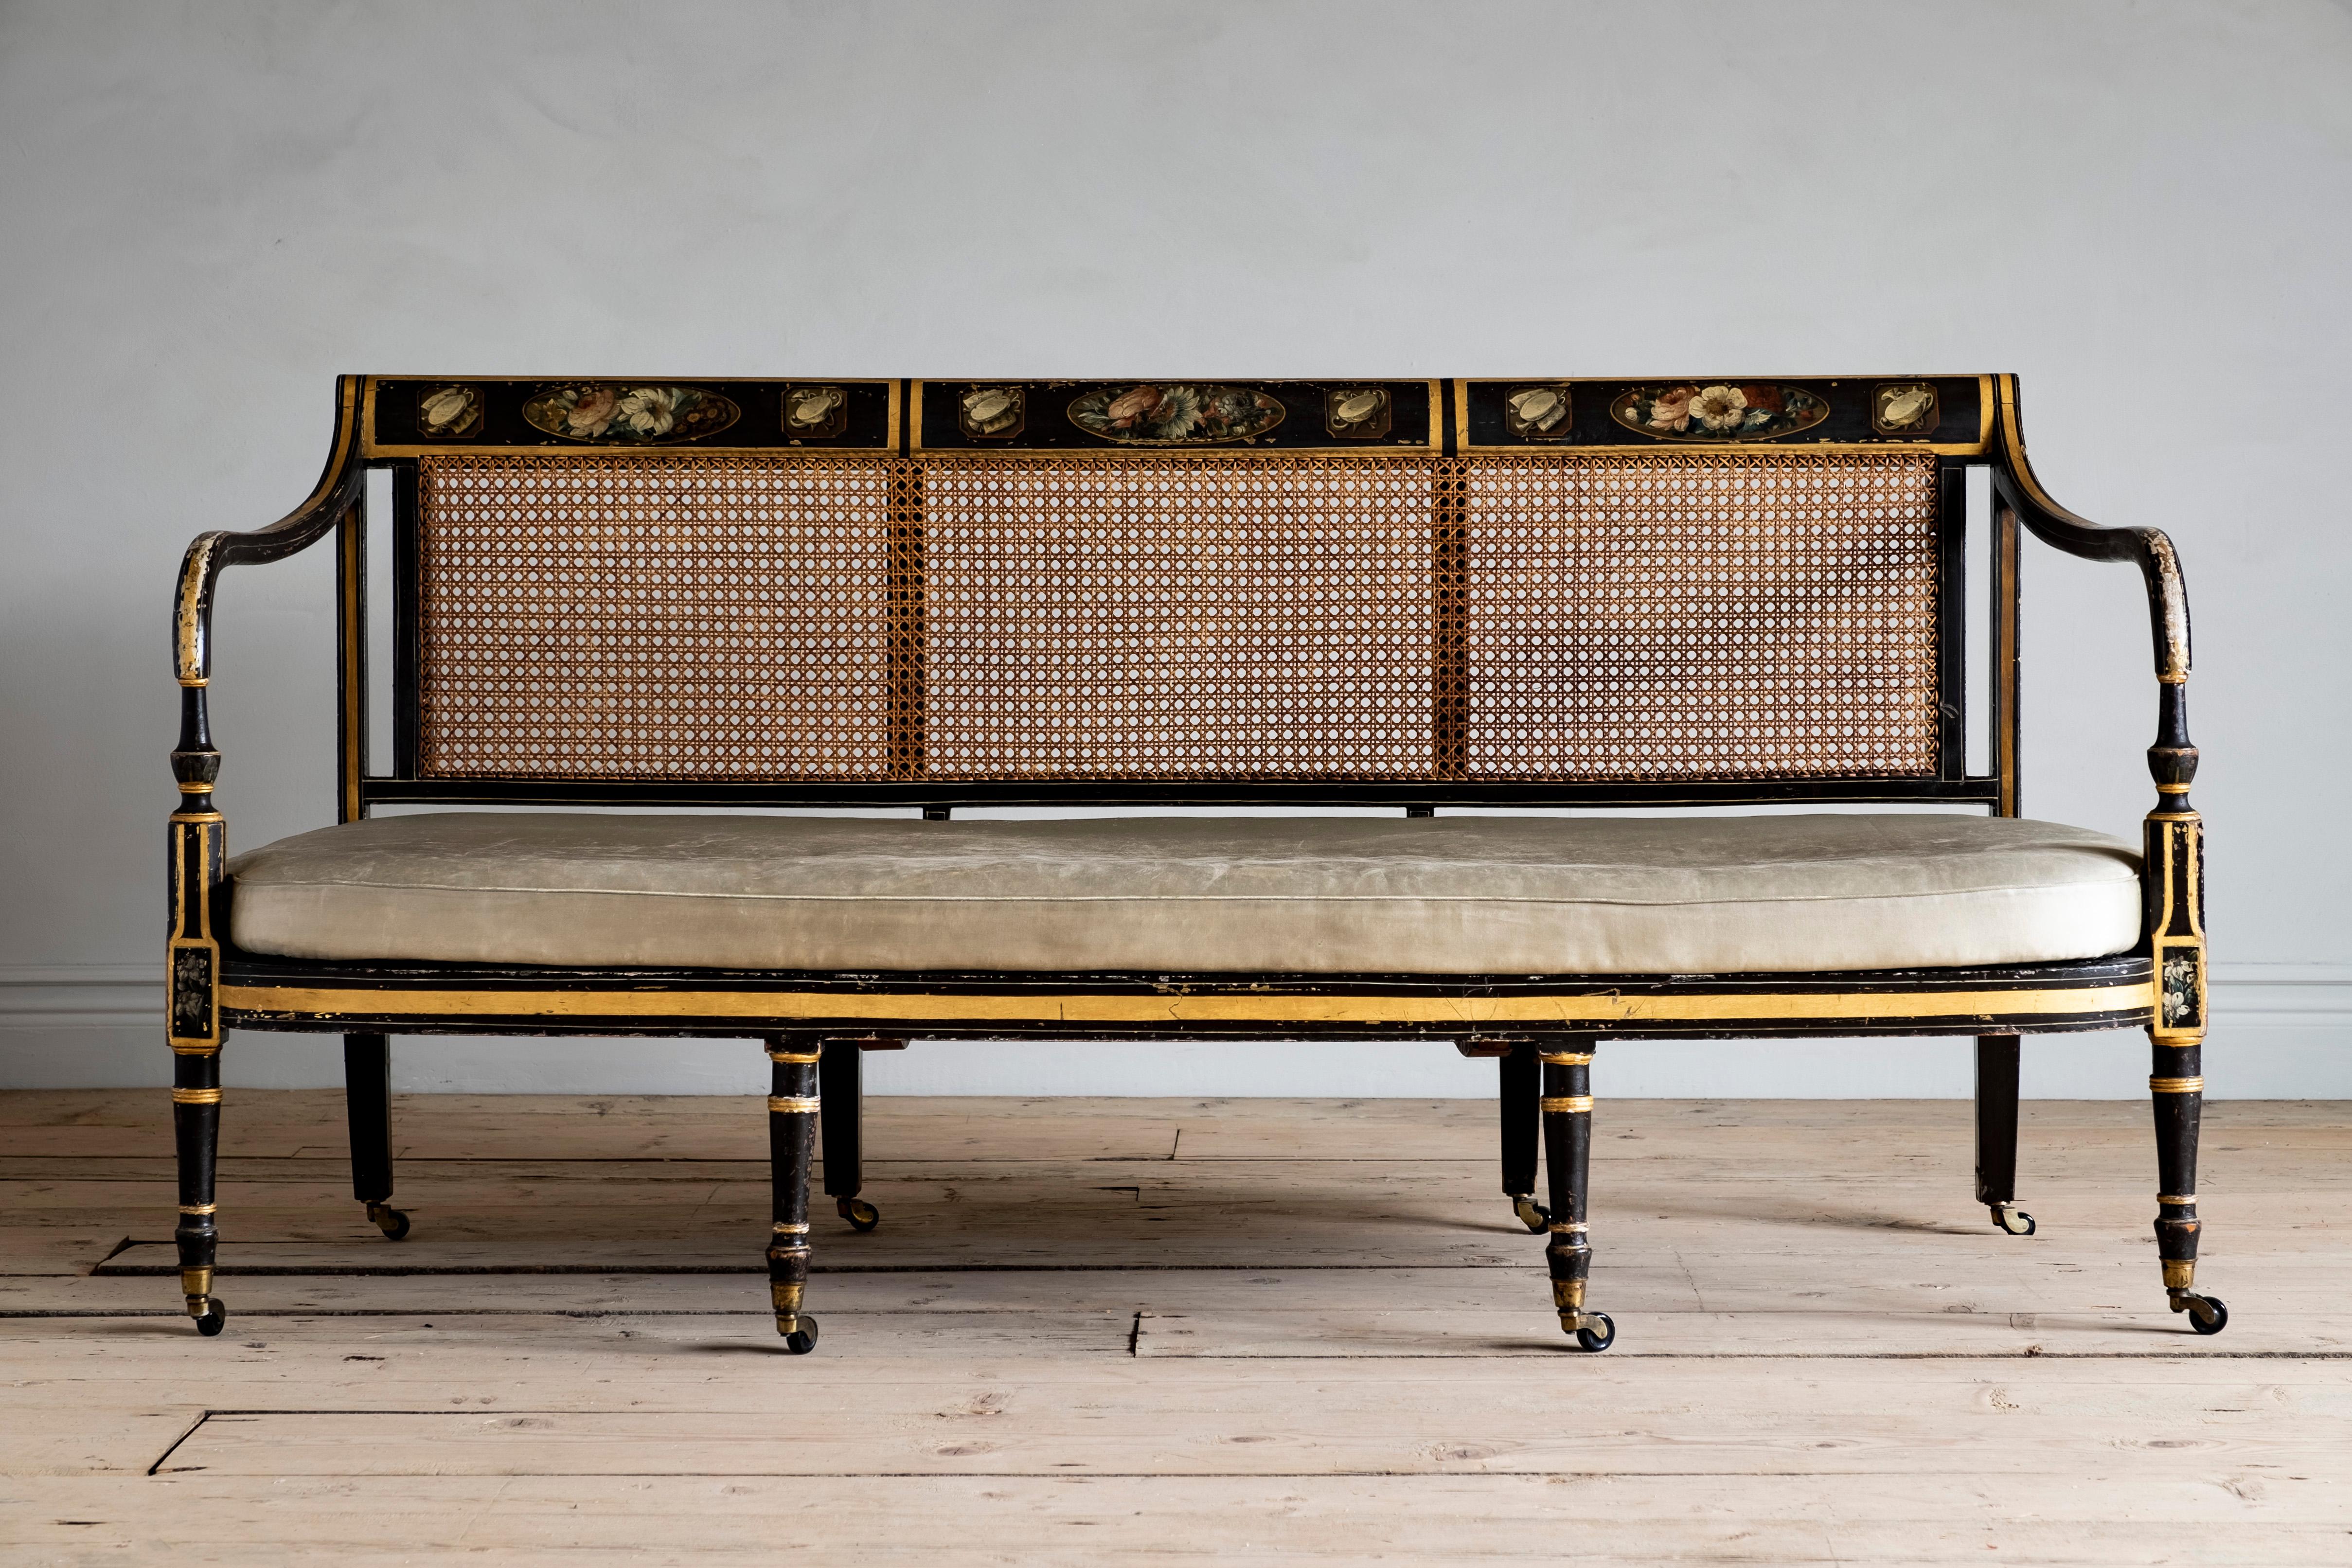 An elegant Regency period painted and caned sofa with turned front legs on casters, circa 1820 England.
     